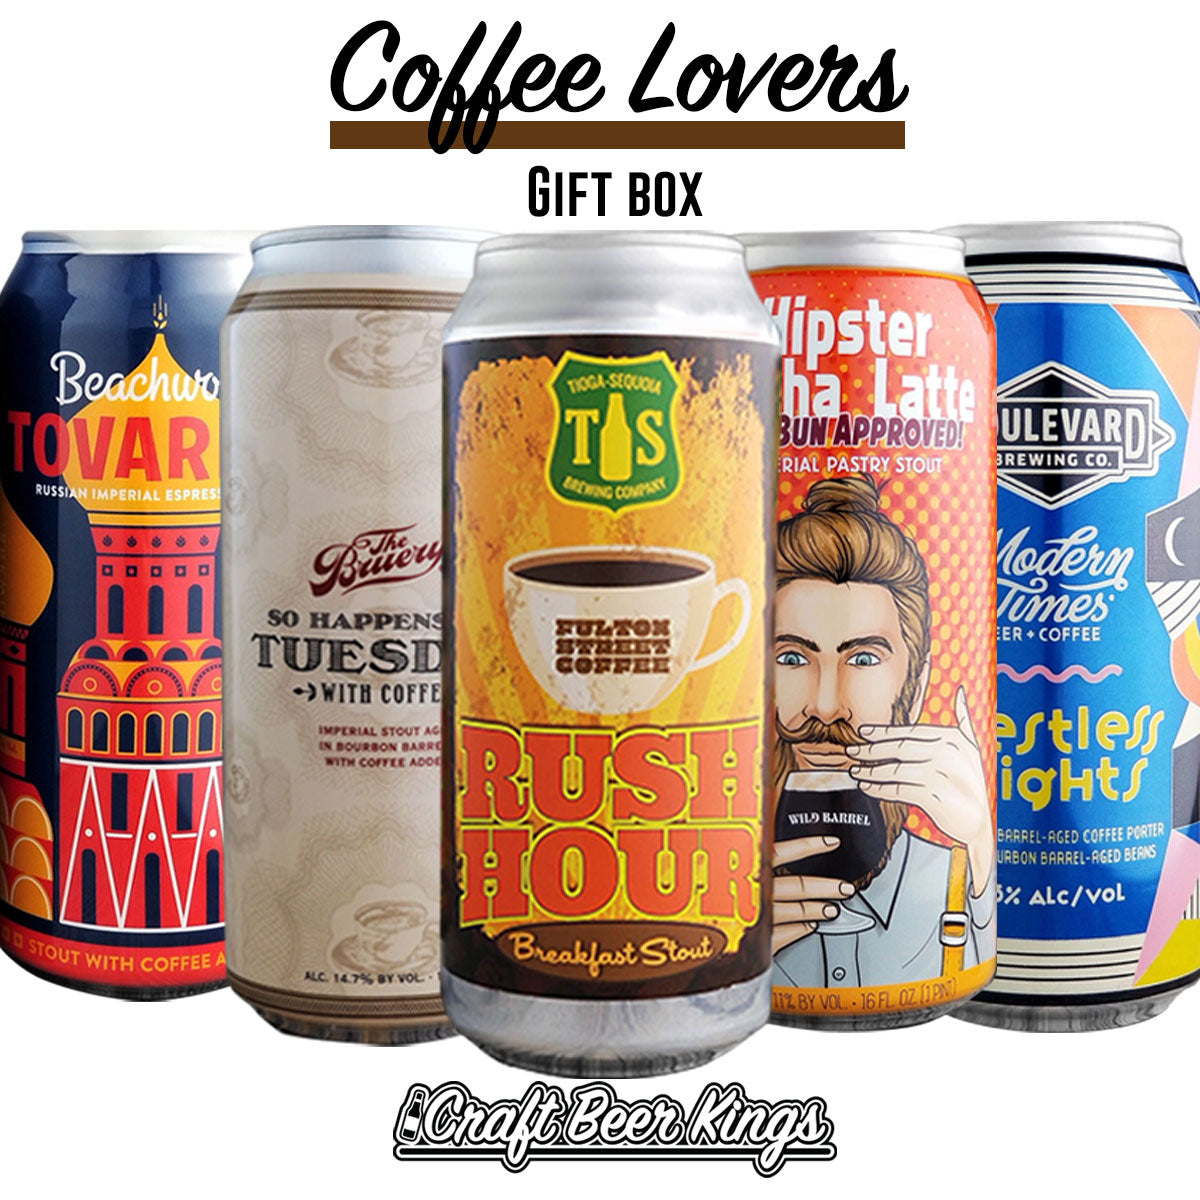 Coffee Lovers Gift Box - Shipping Included!